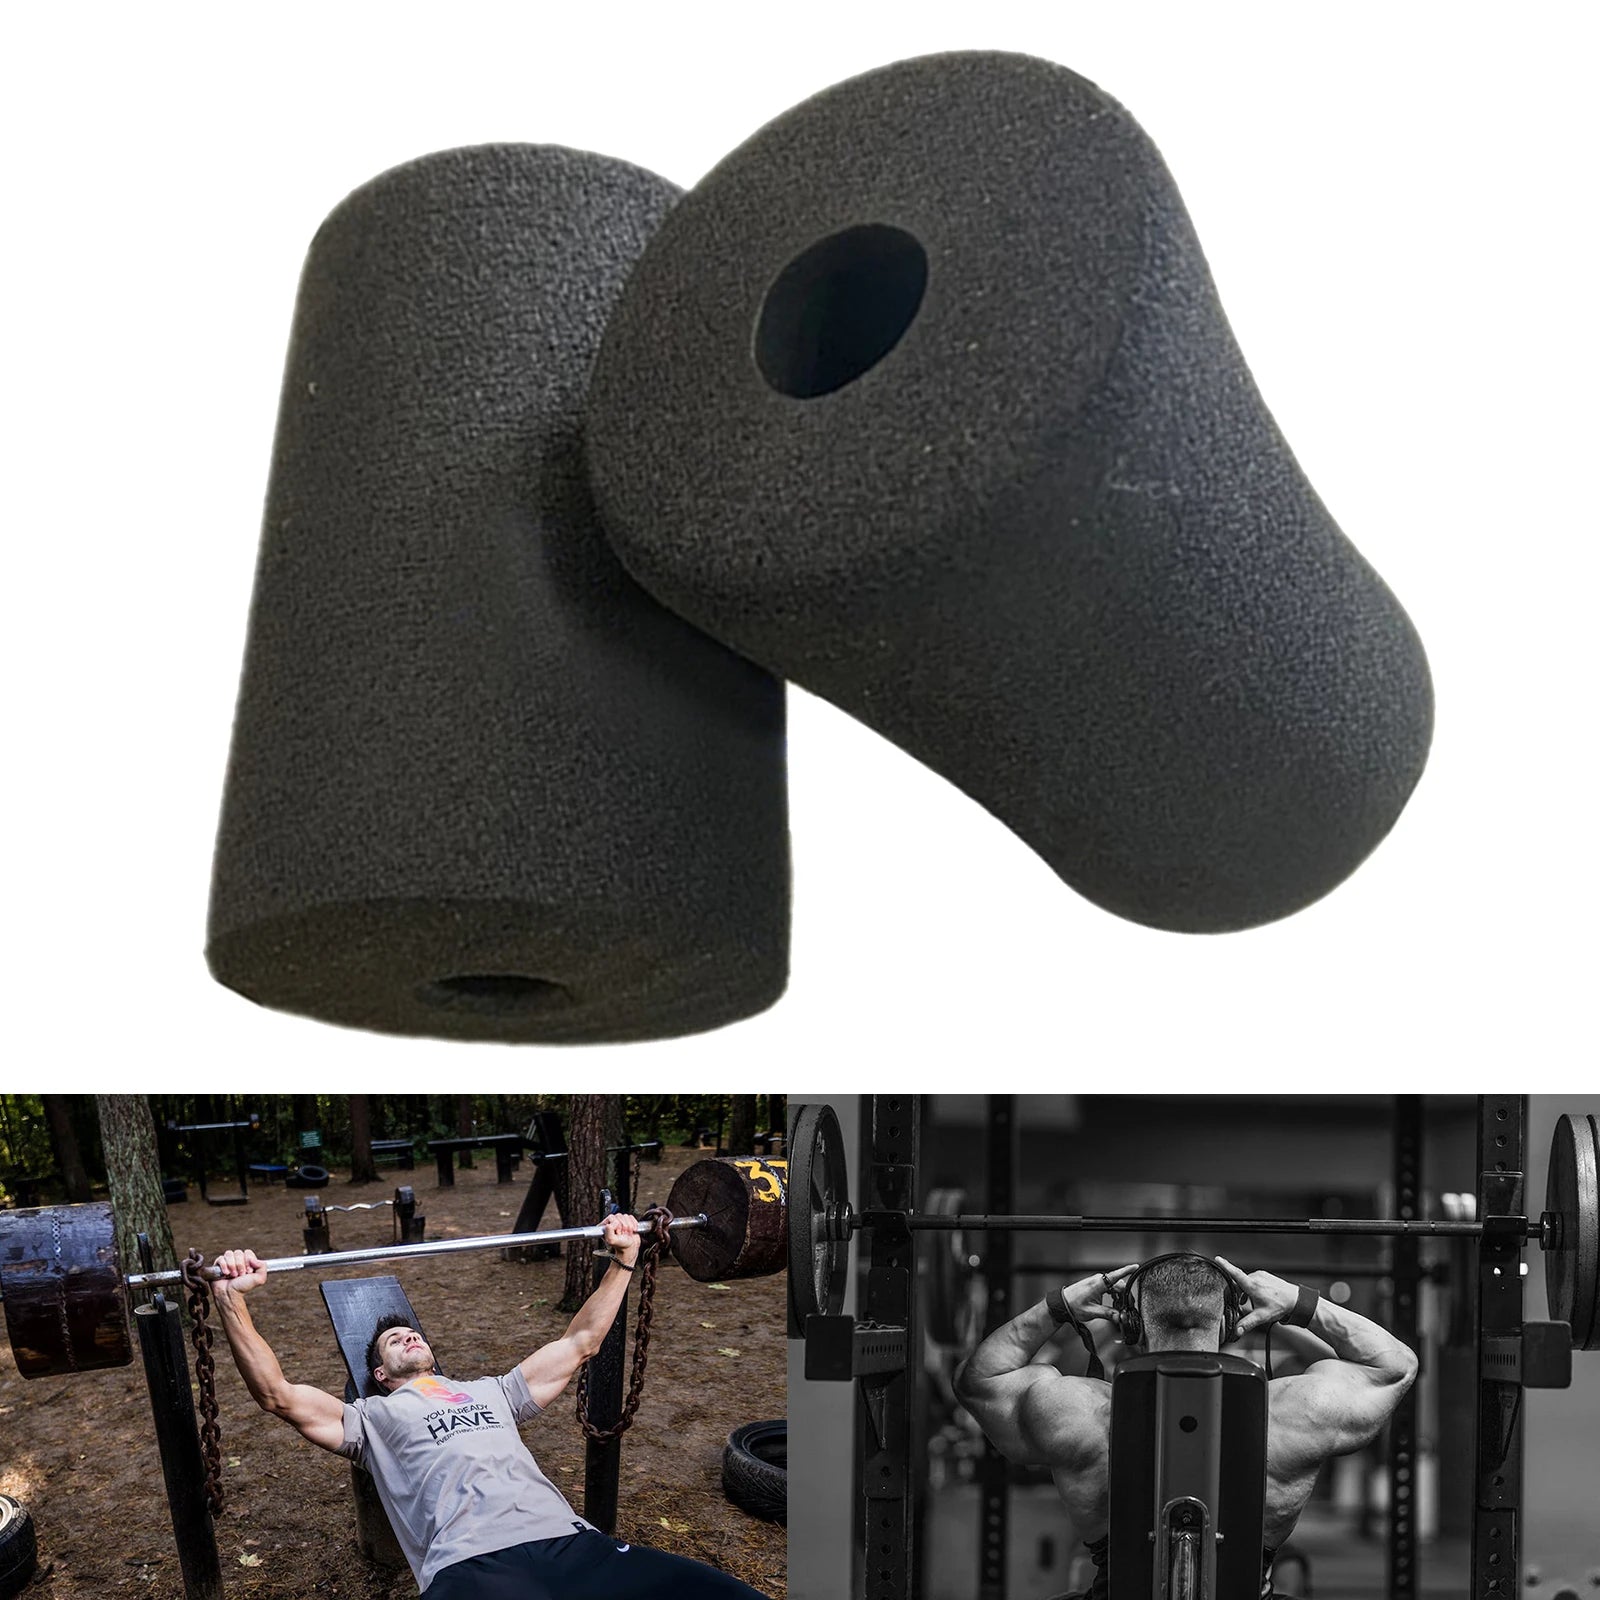 Fitness Foot Foam Pads Rollers Leg Extension For Weight Bench Home